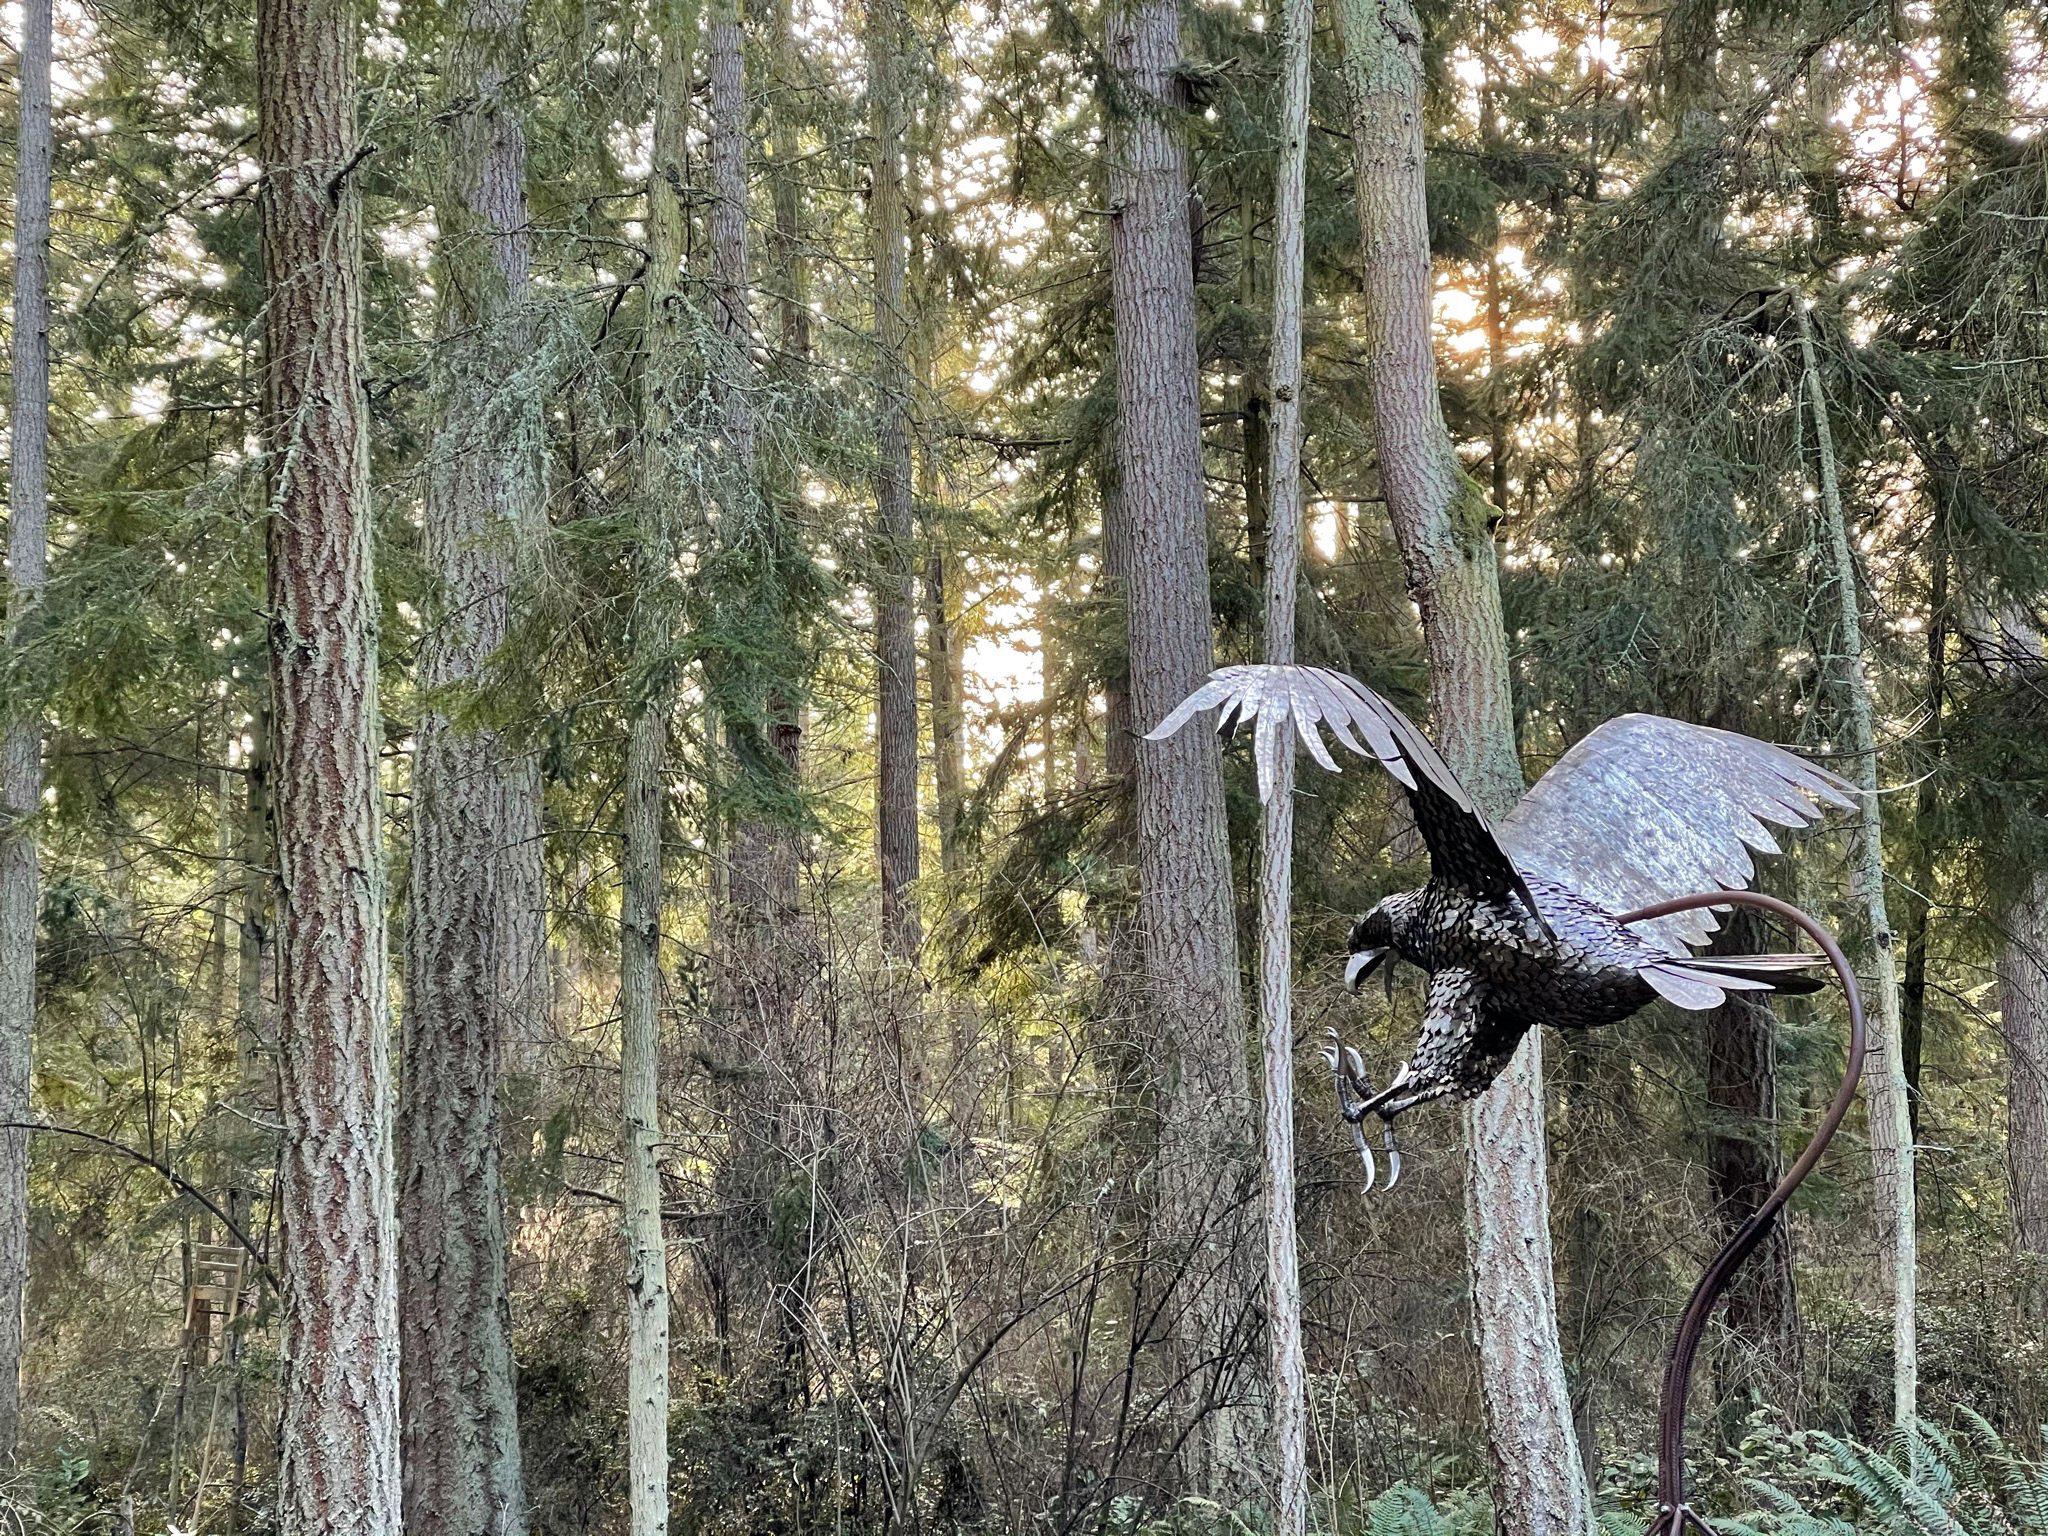 Greg Neal Attacking Eagle at Price Sculpture Forest park garden in Coupeville on Whidbey Island